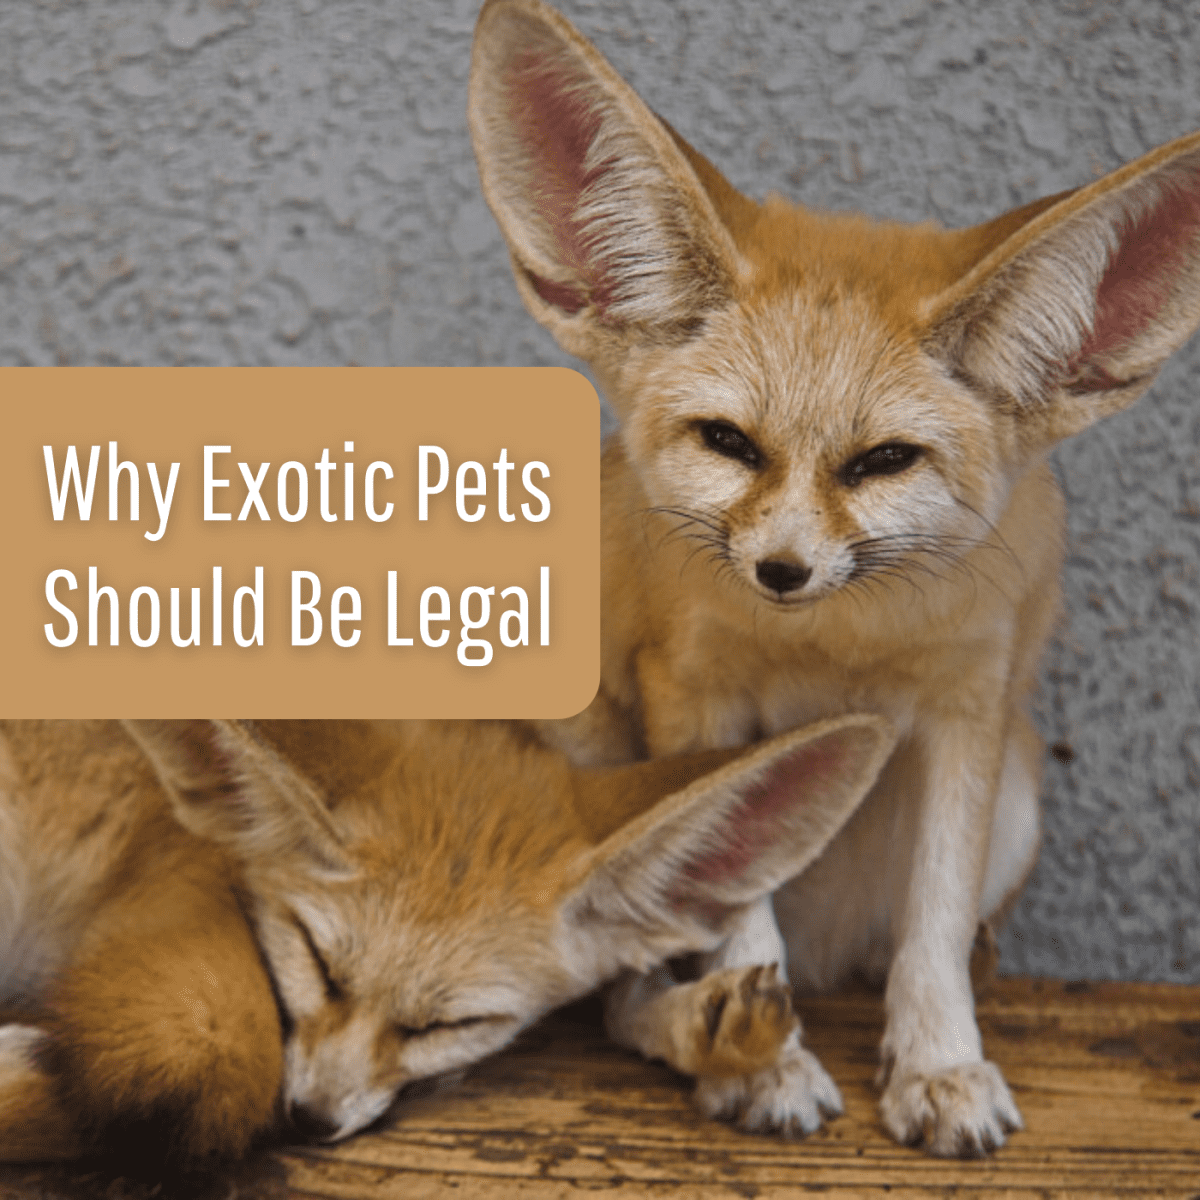 10 Reasons Why Exotic Pets Should Be Legal - PetHelpful